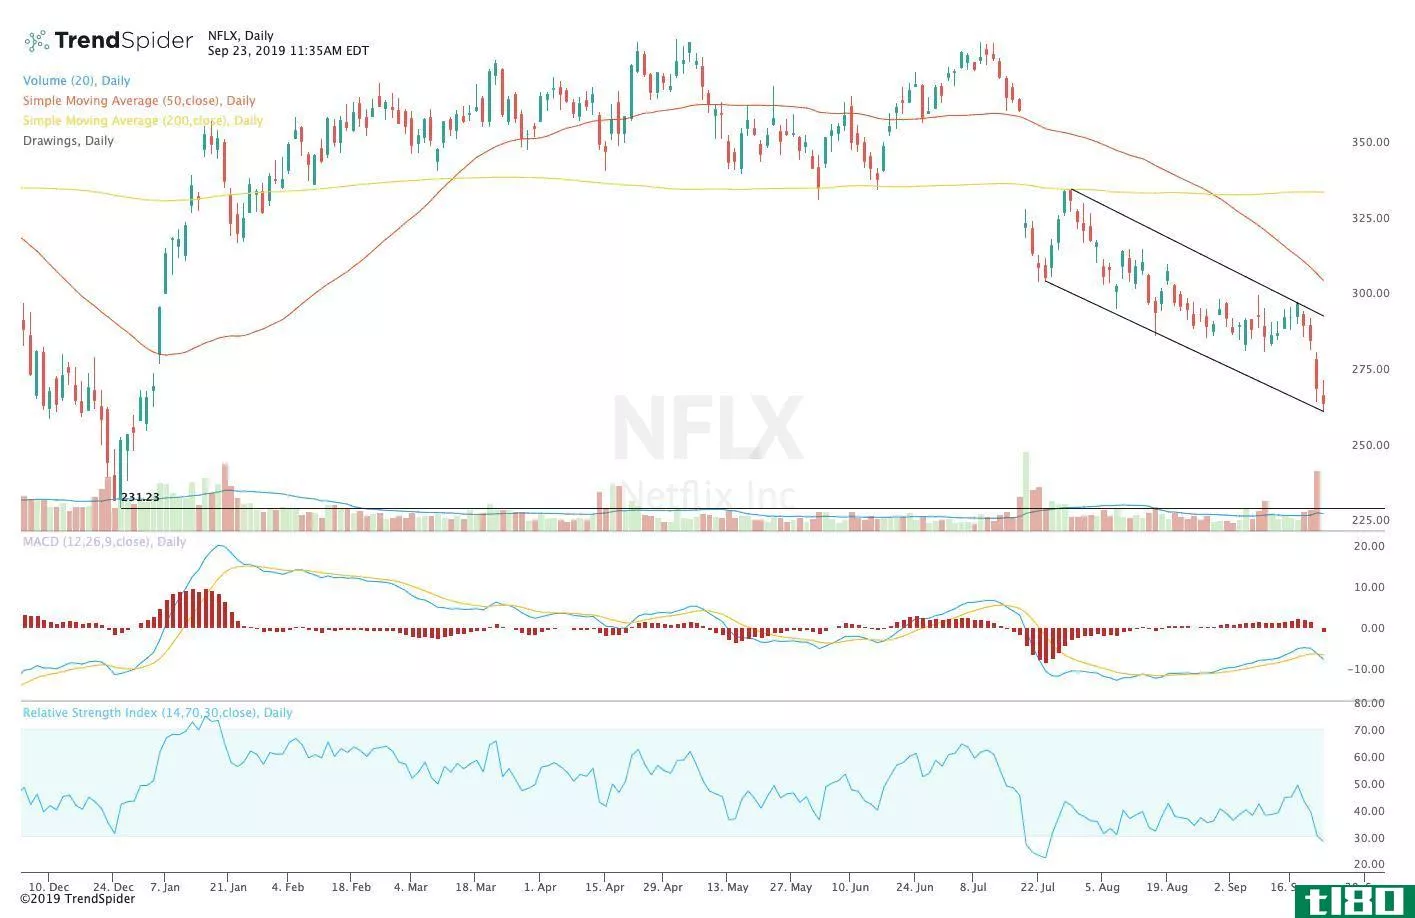 Chart showing the share price performance of Netflix, Inc. (NFLX)